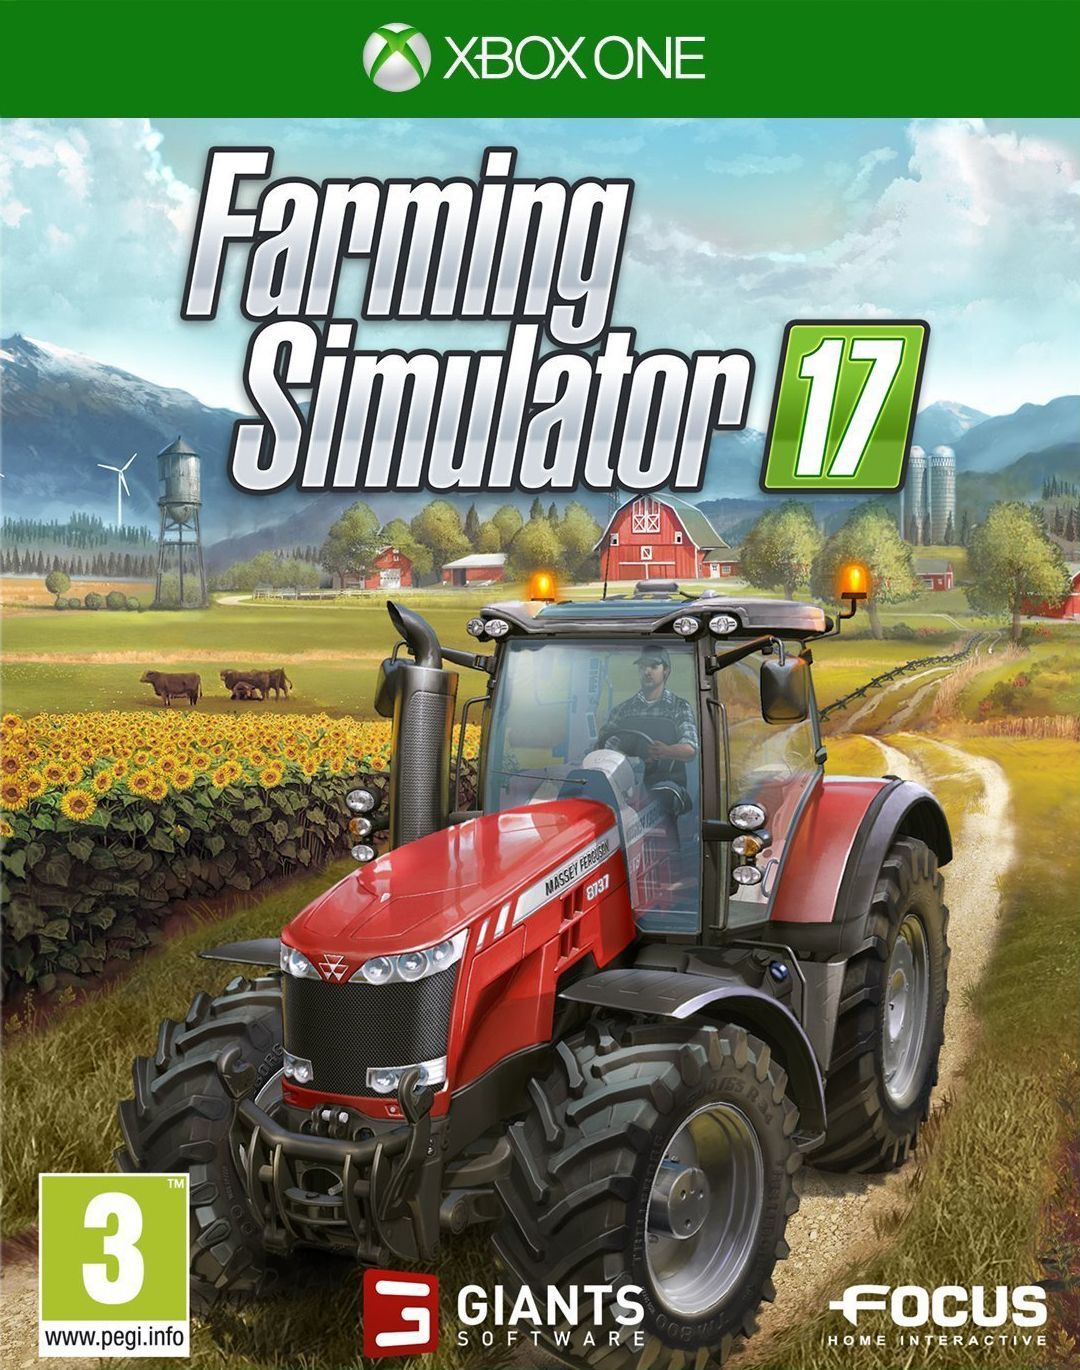 farming-simulator-17-xbox-one-new-buy-from-pwned-games-with-confidence-xbox-one-games-new